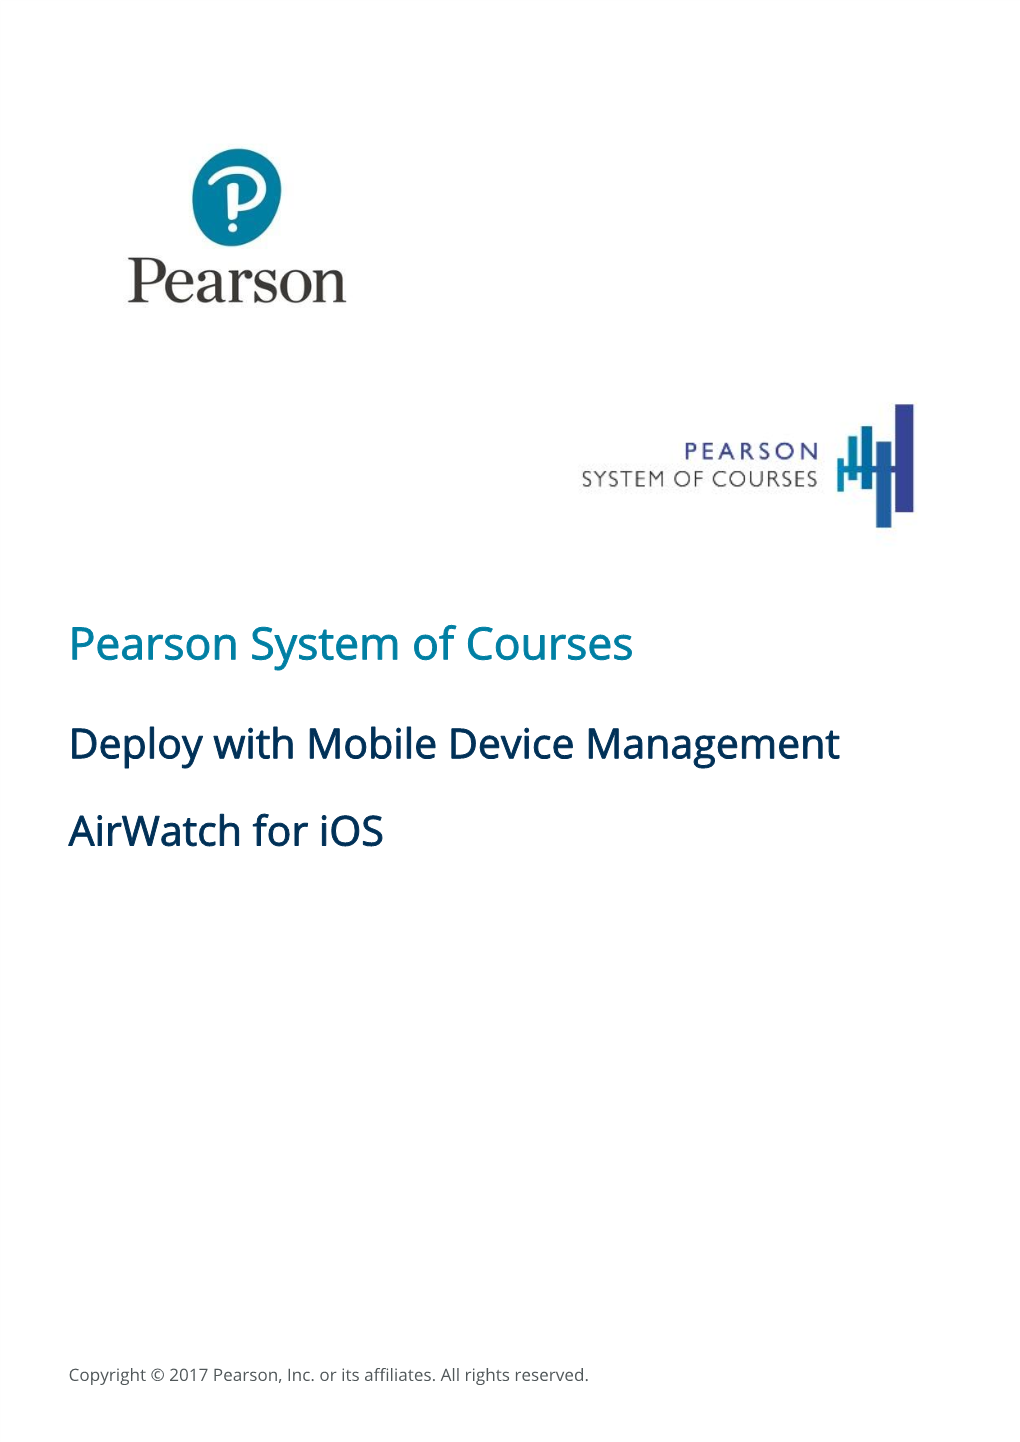 Deploy Pearson System of Courses with Mobile Device Management